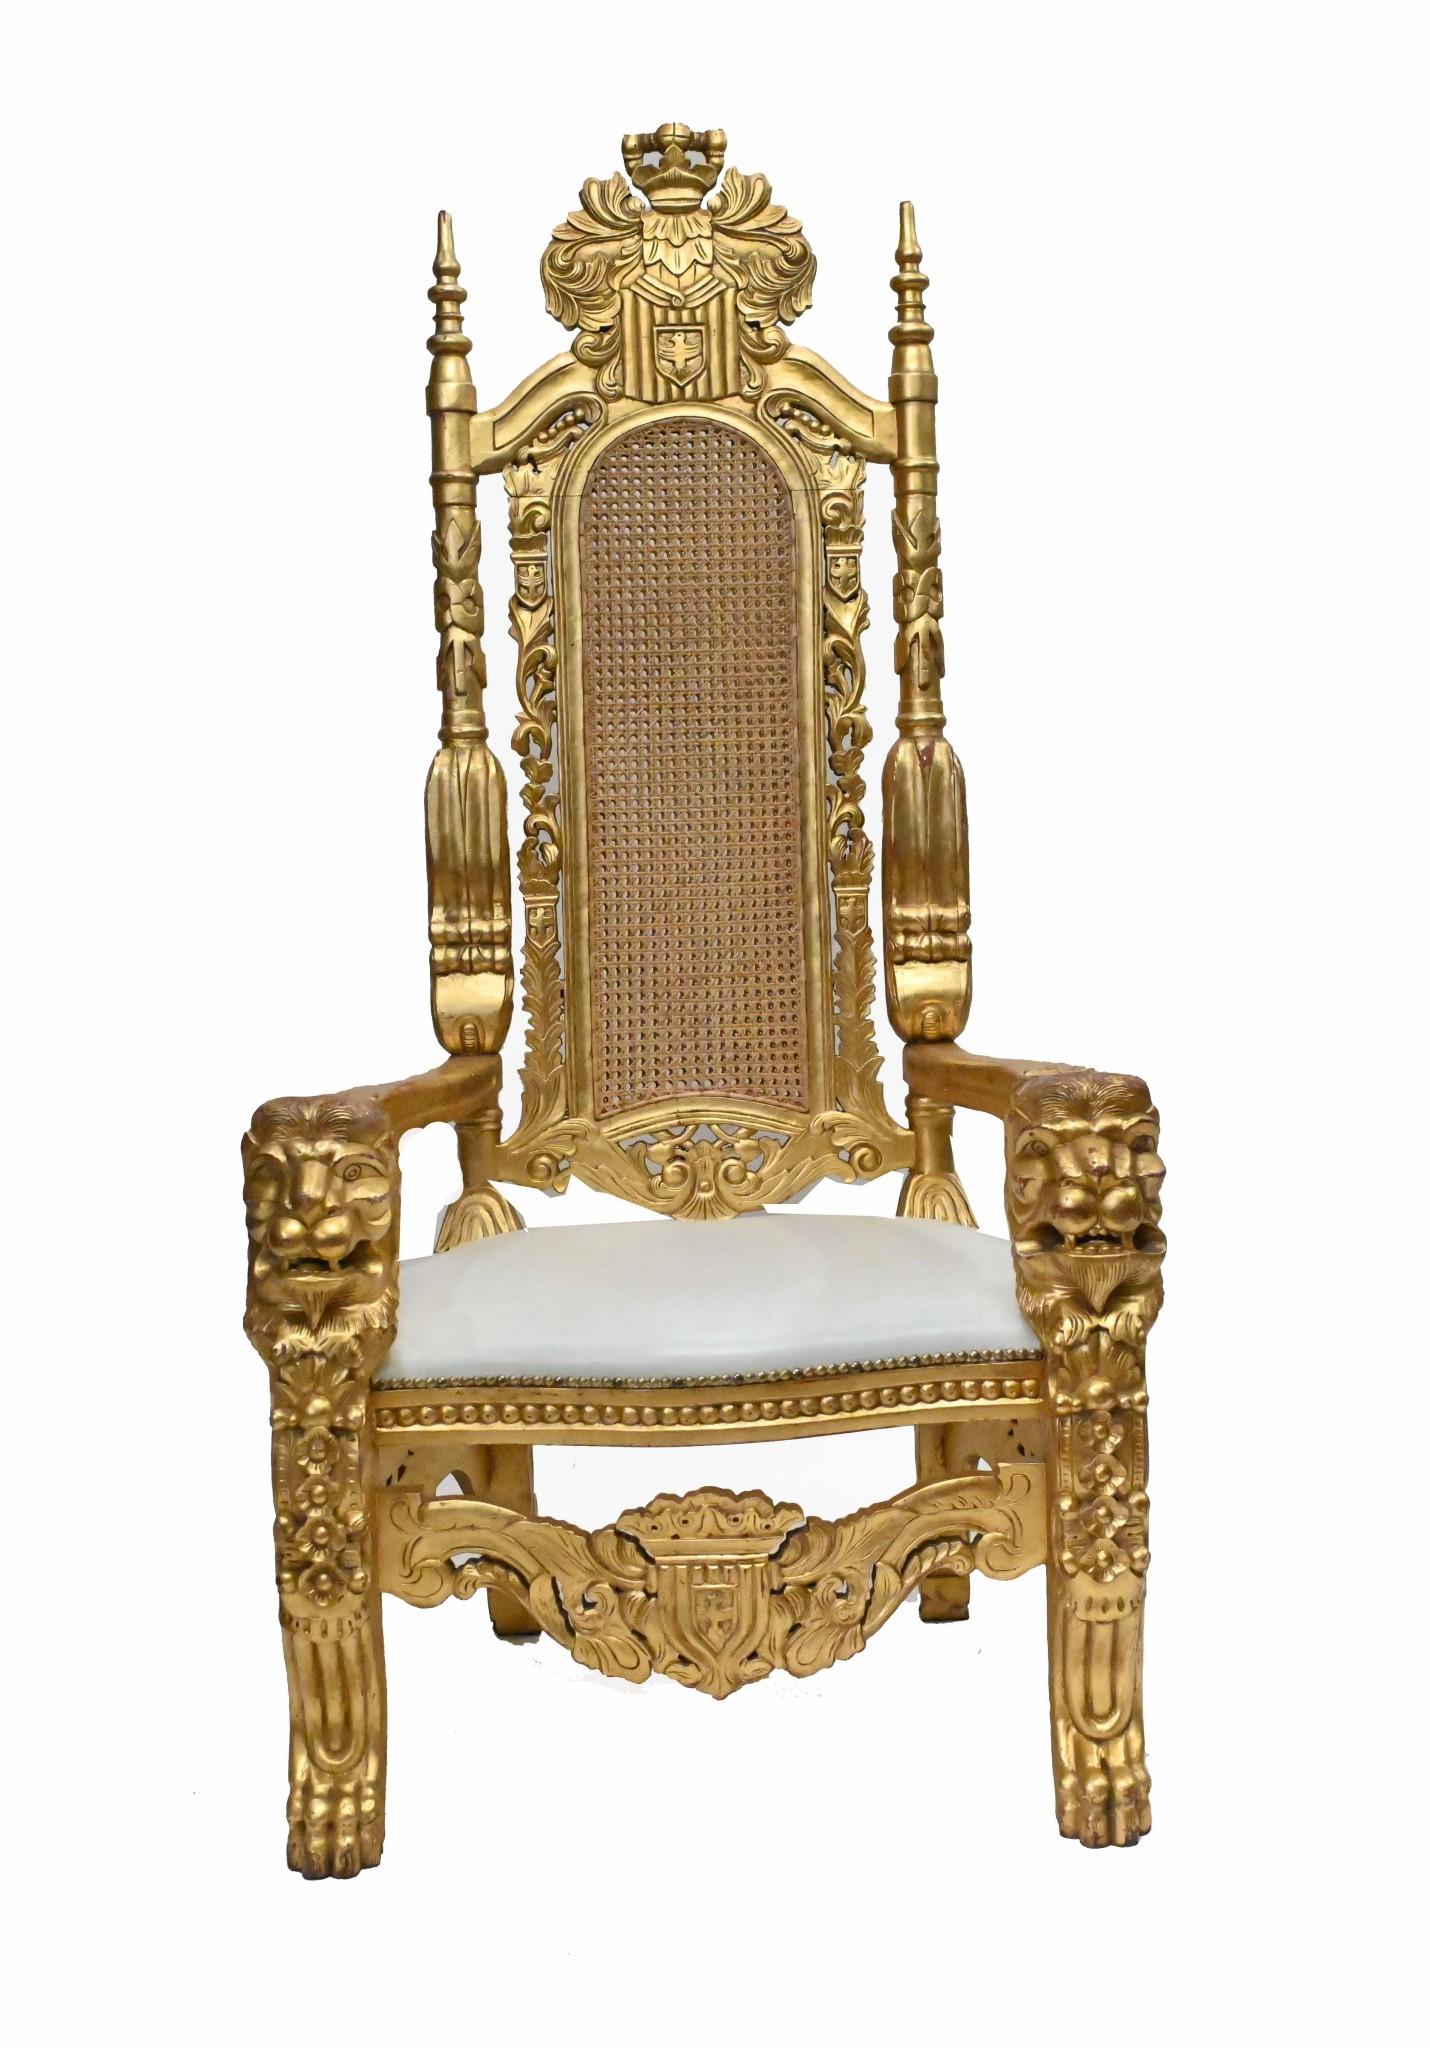 More bling than a Made In Chelsea series, you are viewing a pair of large gilt thrones
Hand carved with distinctive lions heads for the arms
Top of the elaborate back rest almost six feet tall - 175 CM - so good size to these
Very elaborately